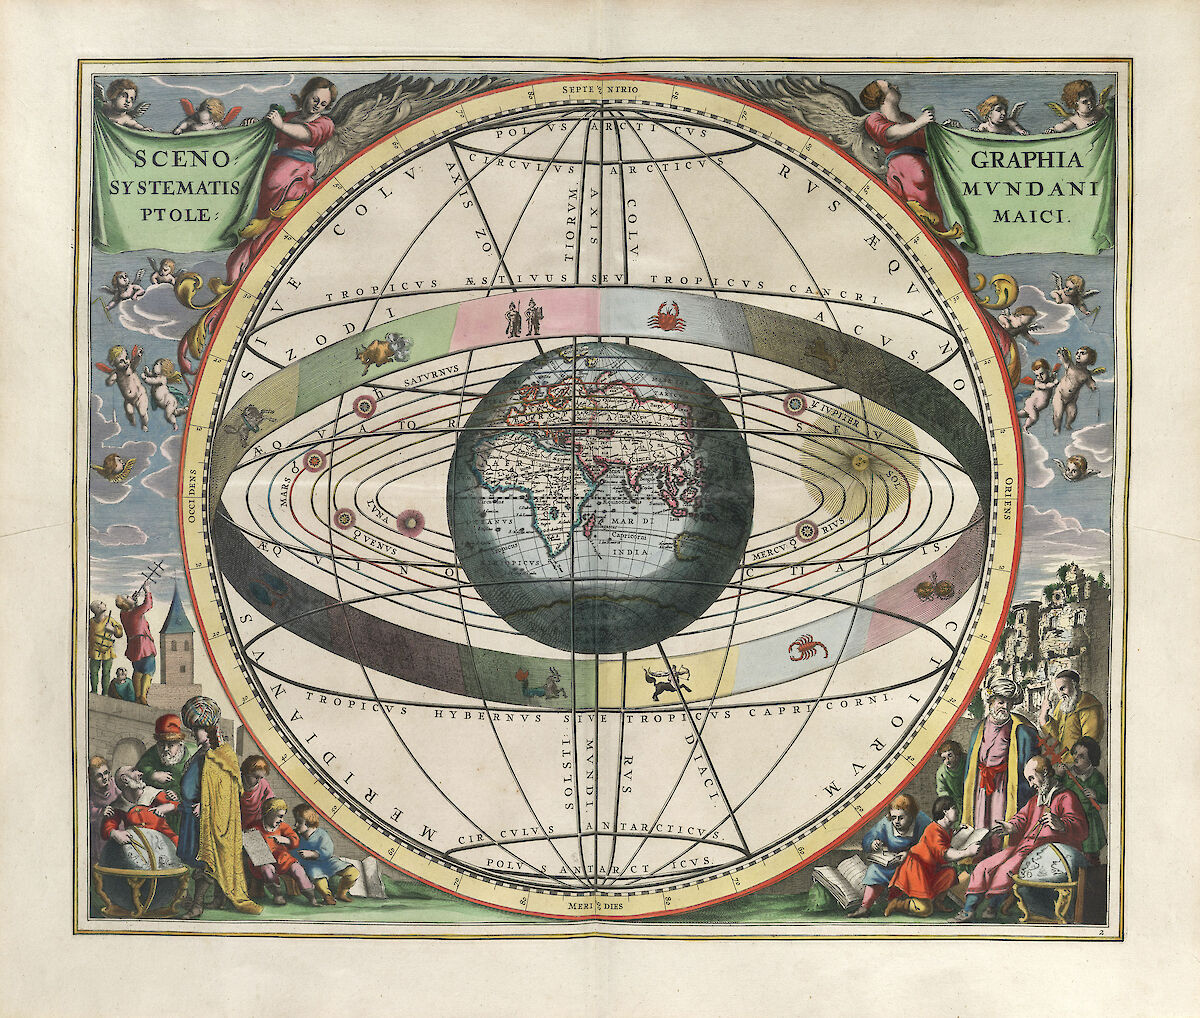 The Ptolemaic Cosmography by Andreas Cellarius